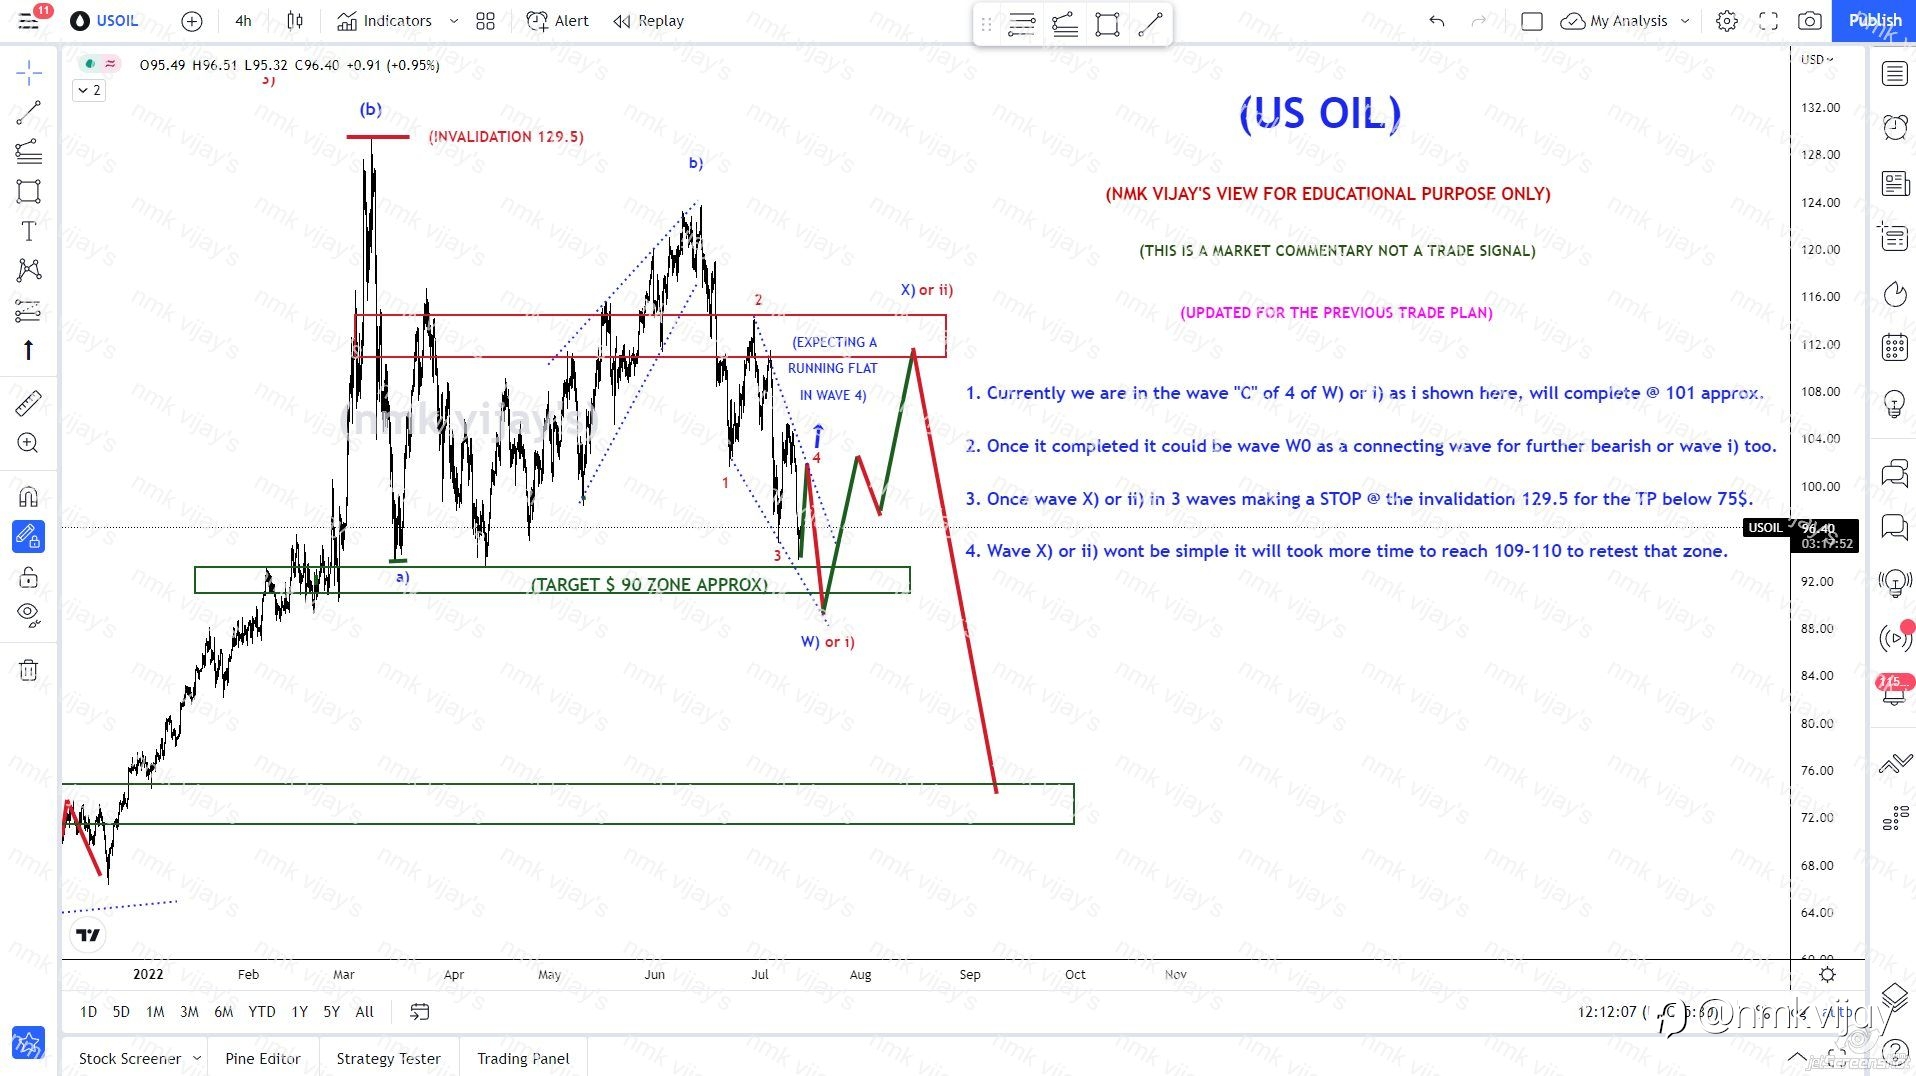 USOIL-Expecting a running flat in wave 4 and W) or i) to 90?